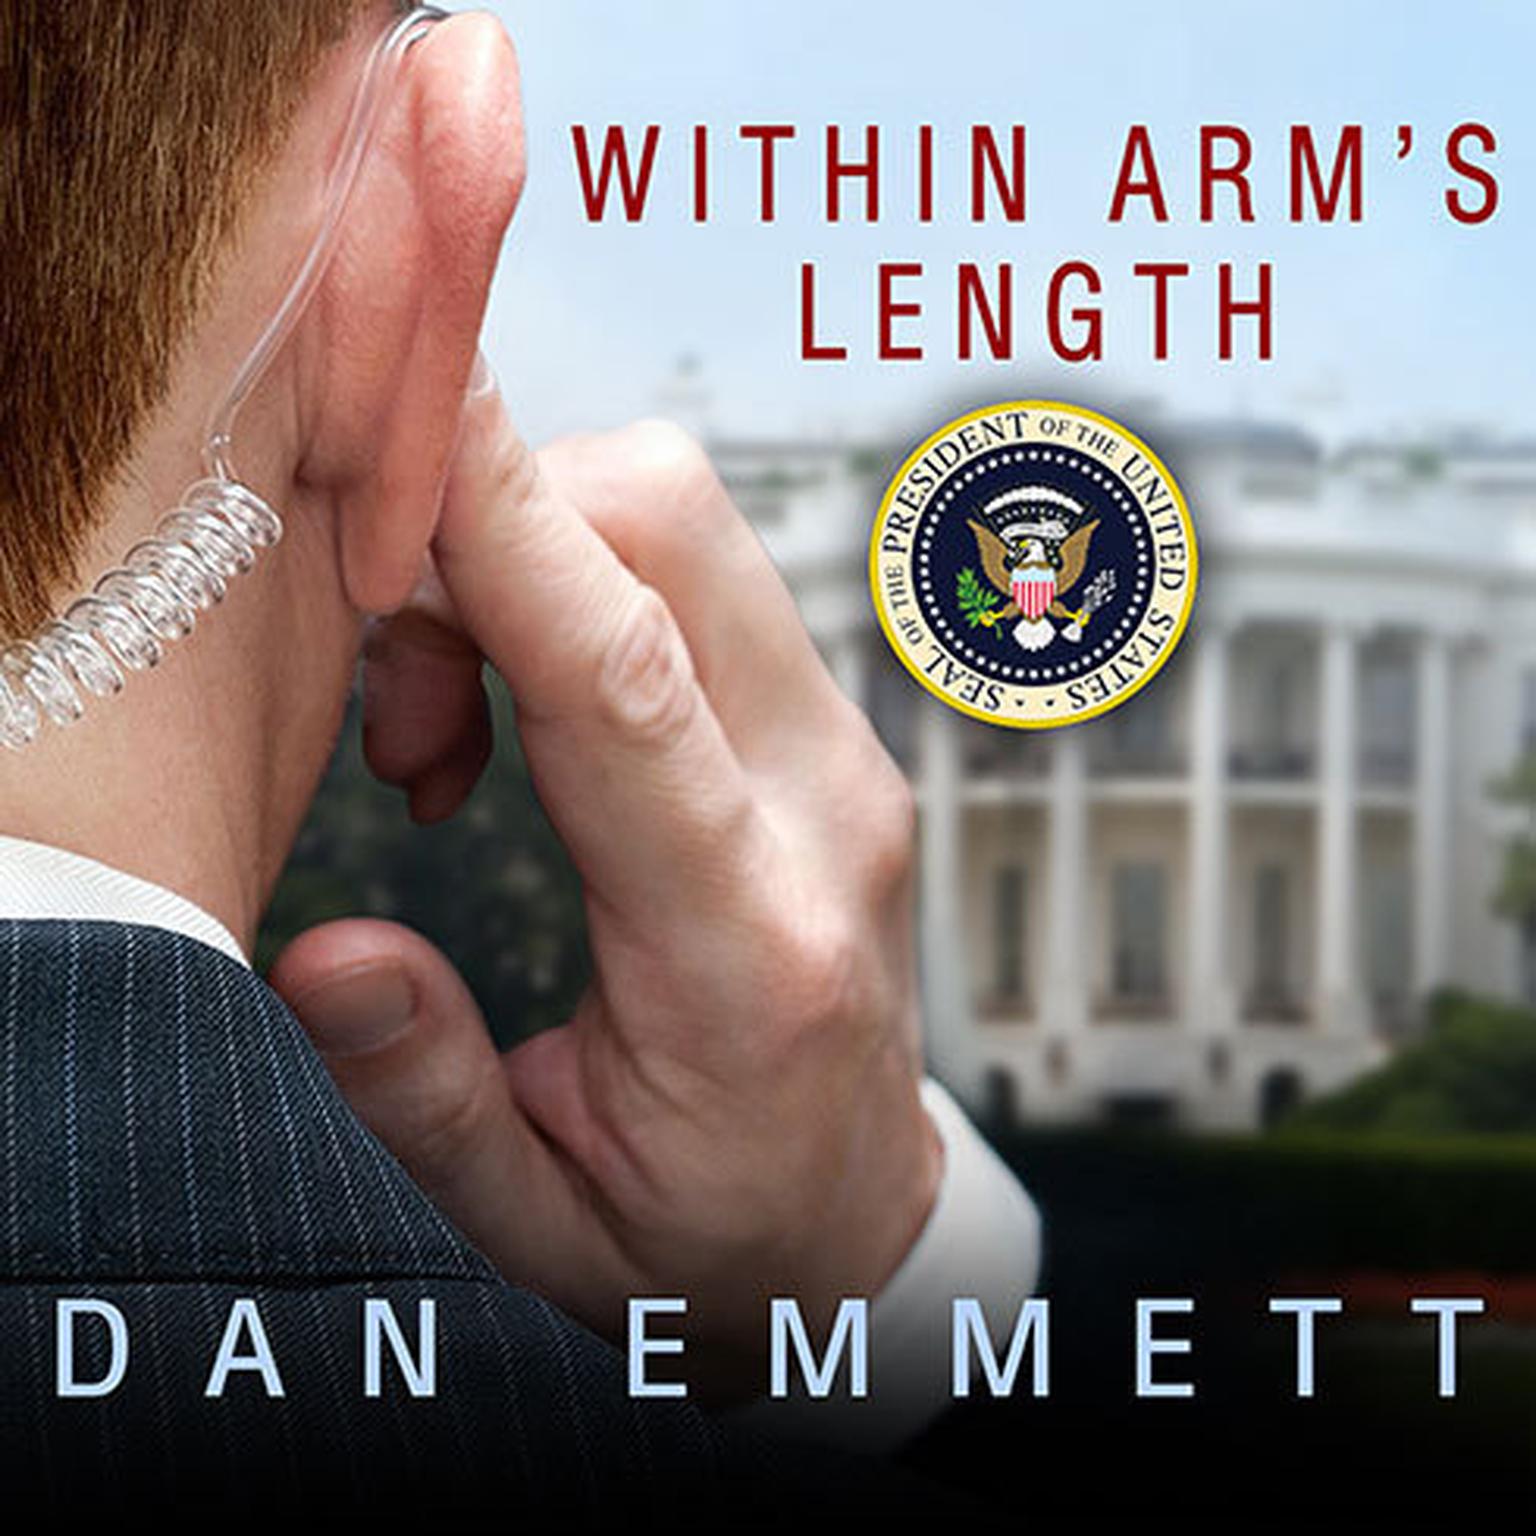 Within Arms Length: A Secret Service Agents Definitive Inside Account of Protecting the President Audiobook, by Dan Emmett